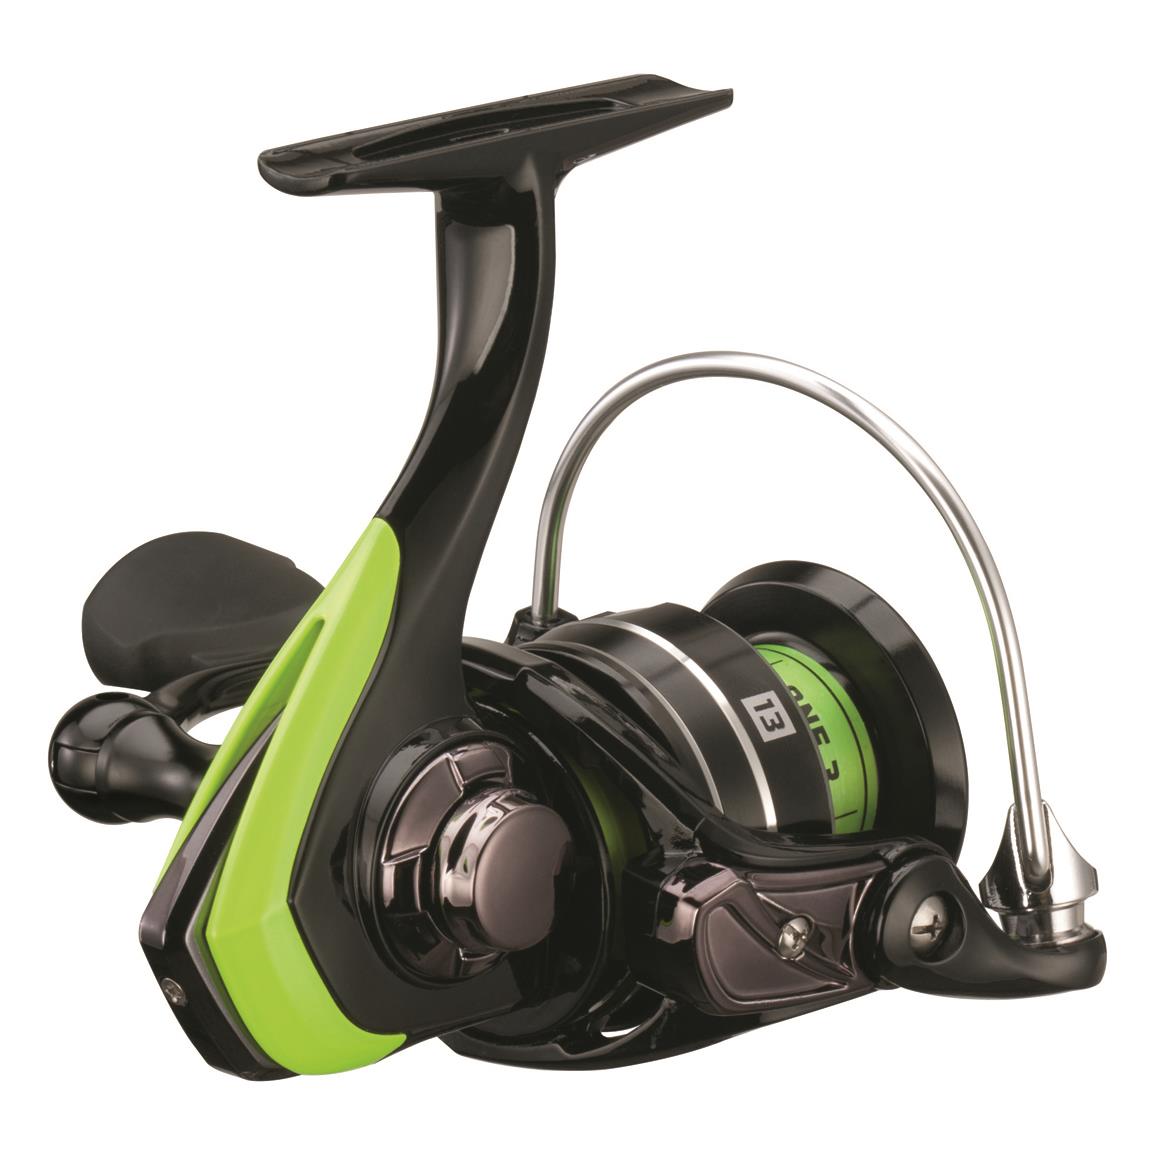 13 Fishing Inception G2 Power Low Profile Reel, 5.3:1 Gear Ratio